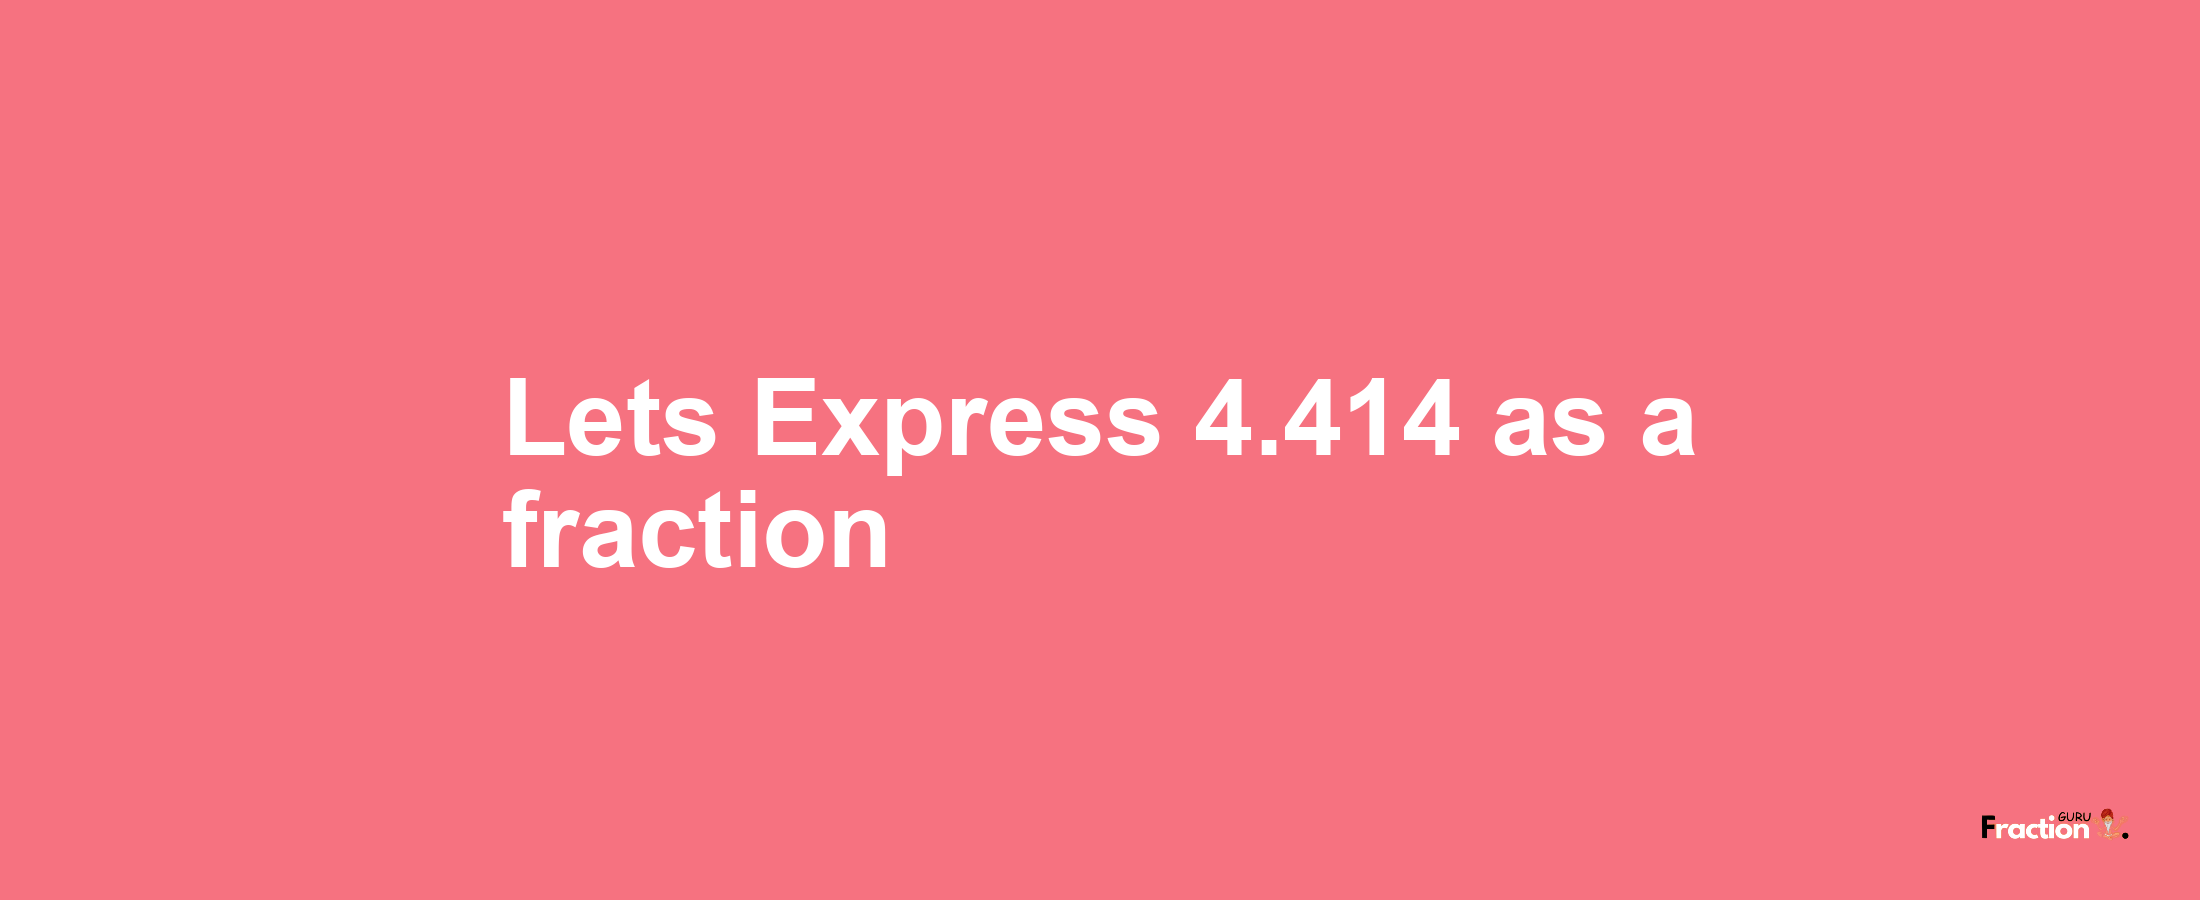 Lets Express 4.414 as afraction